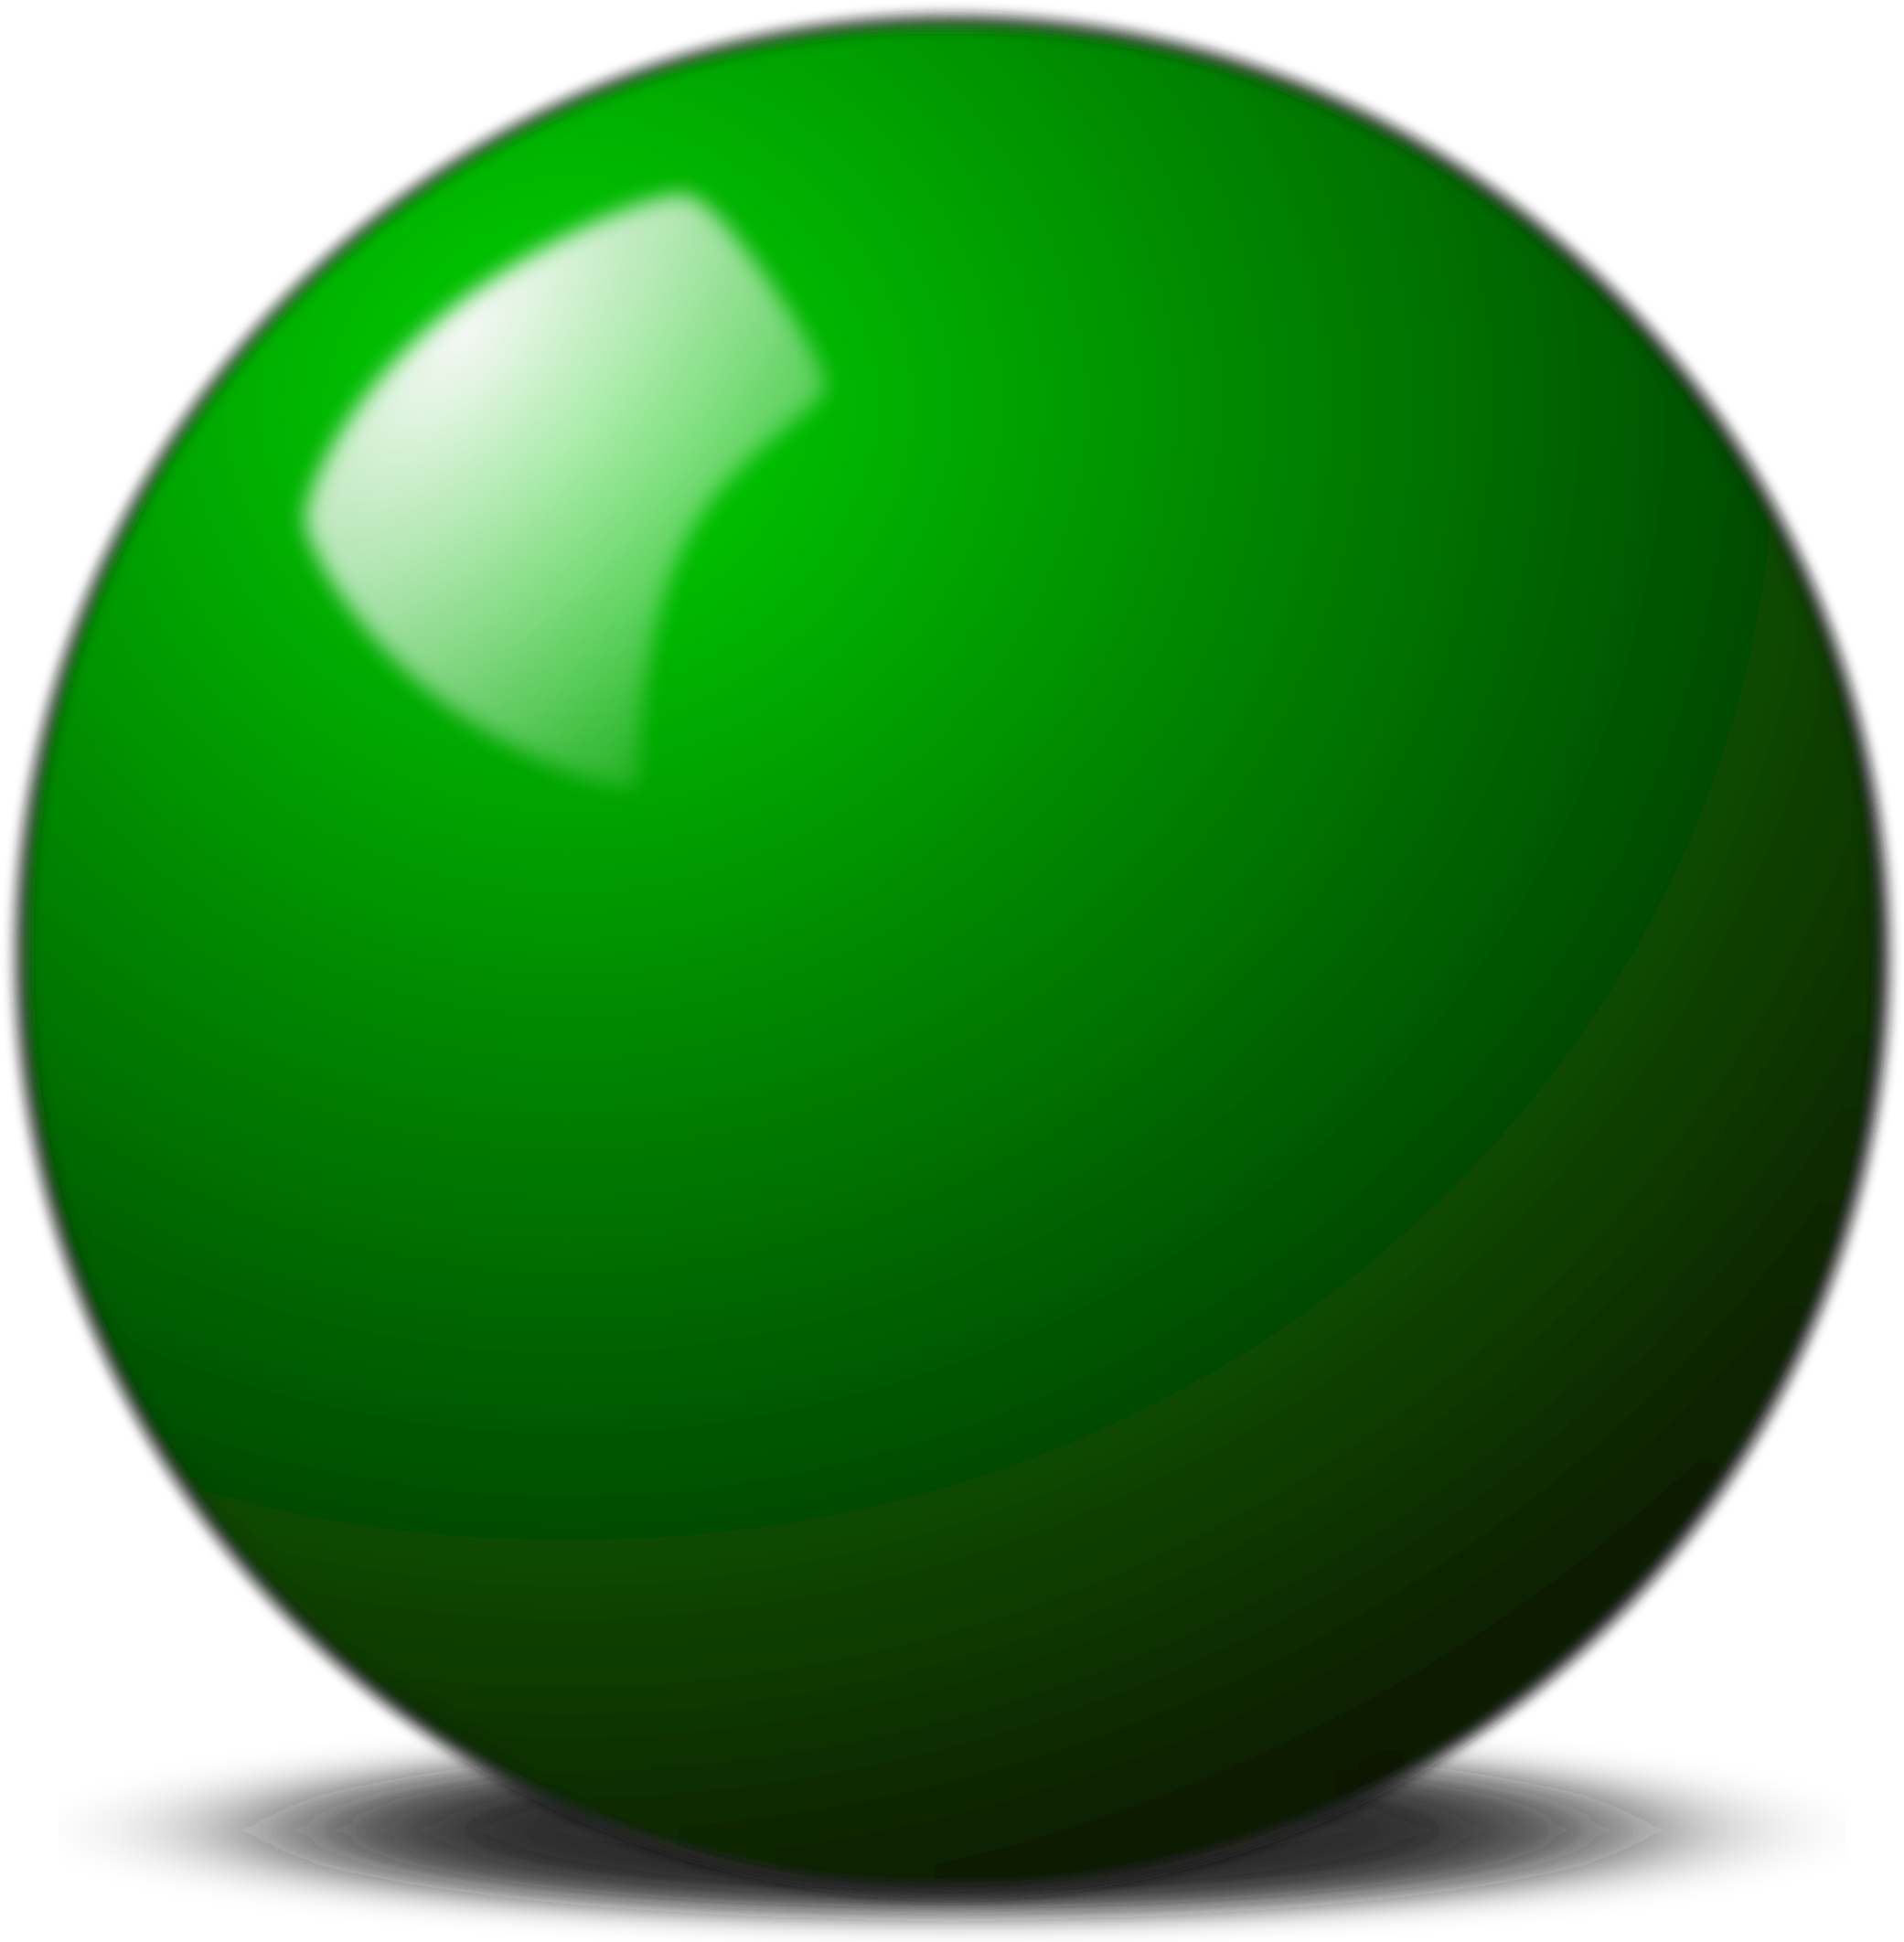 A Green Ball With Black Background